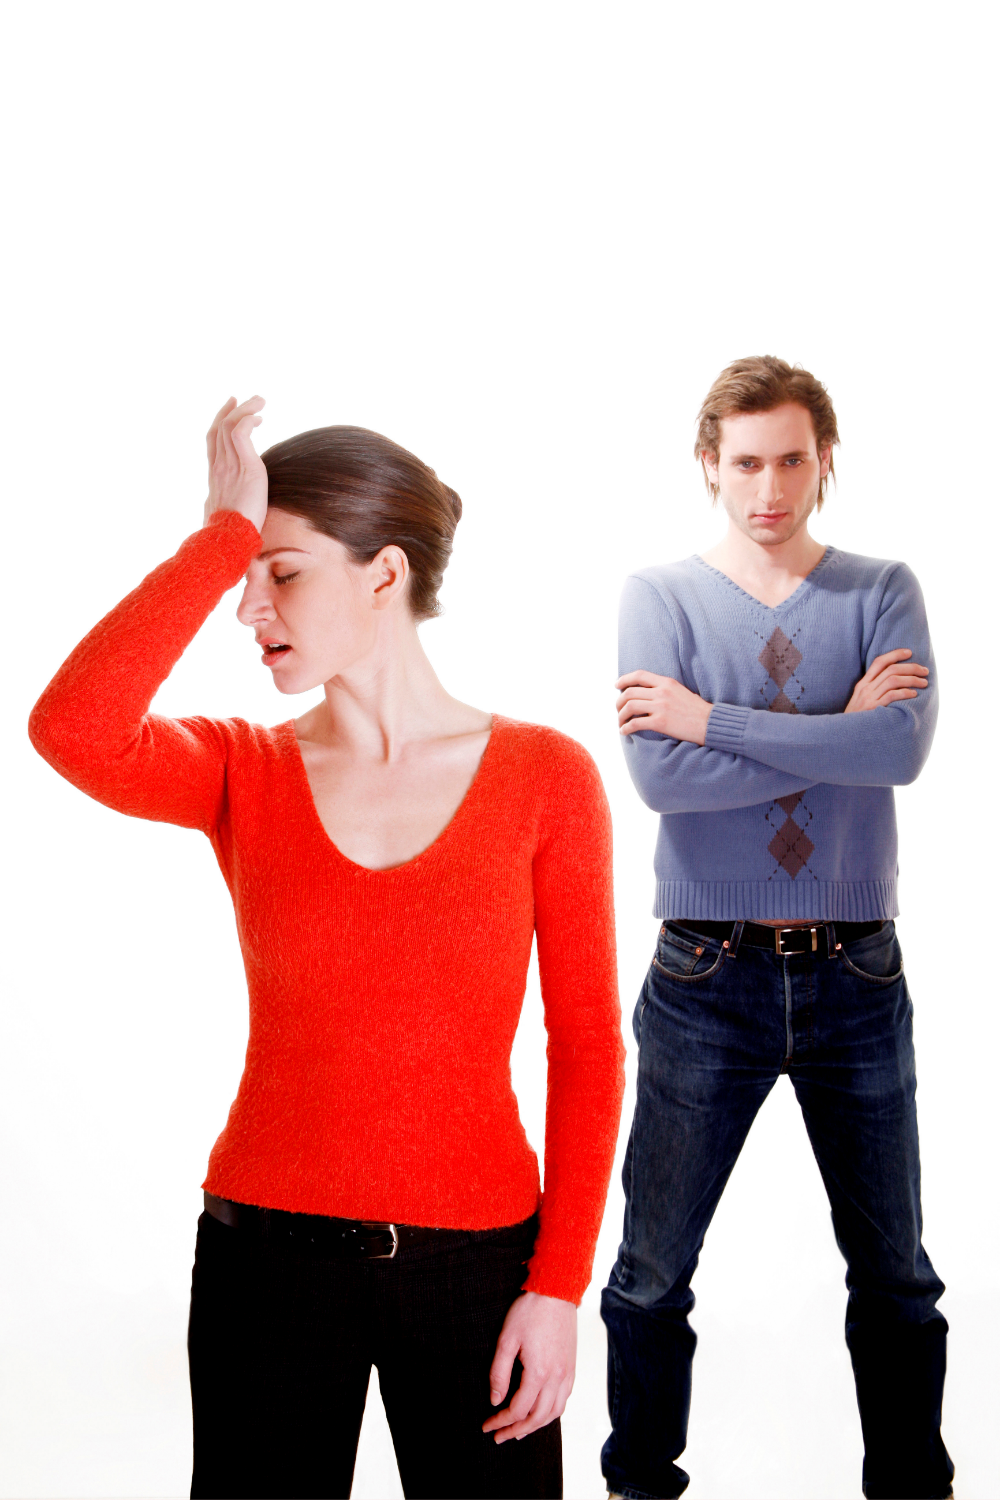 15 Unrealistic Expectations That Can Ruin Your Marriage